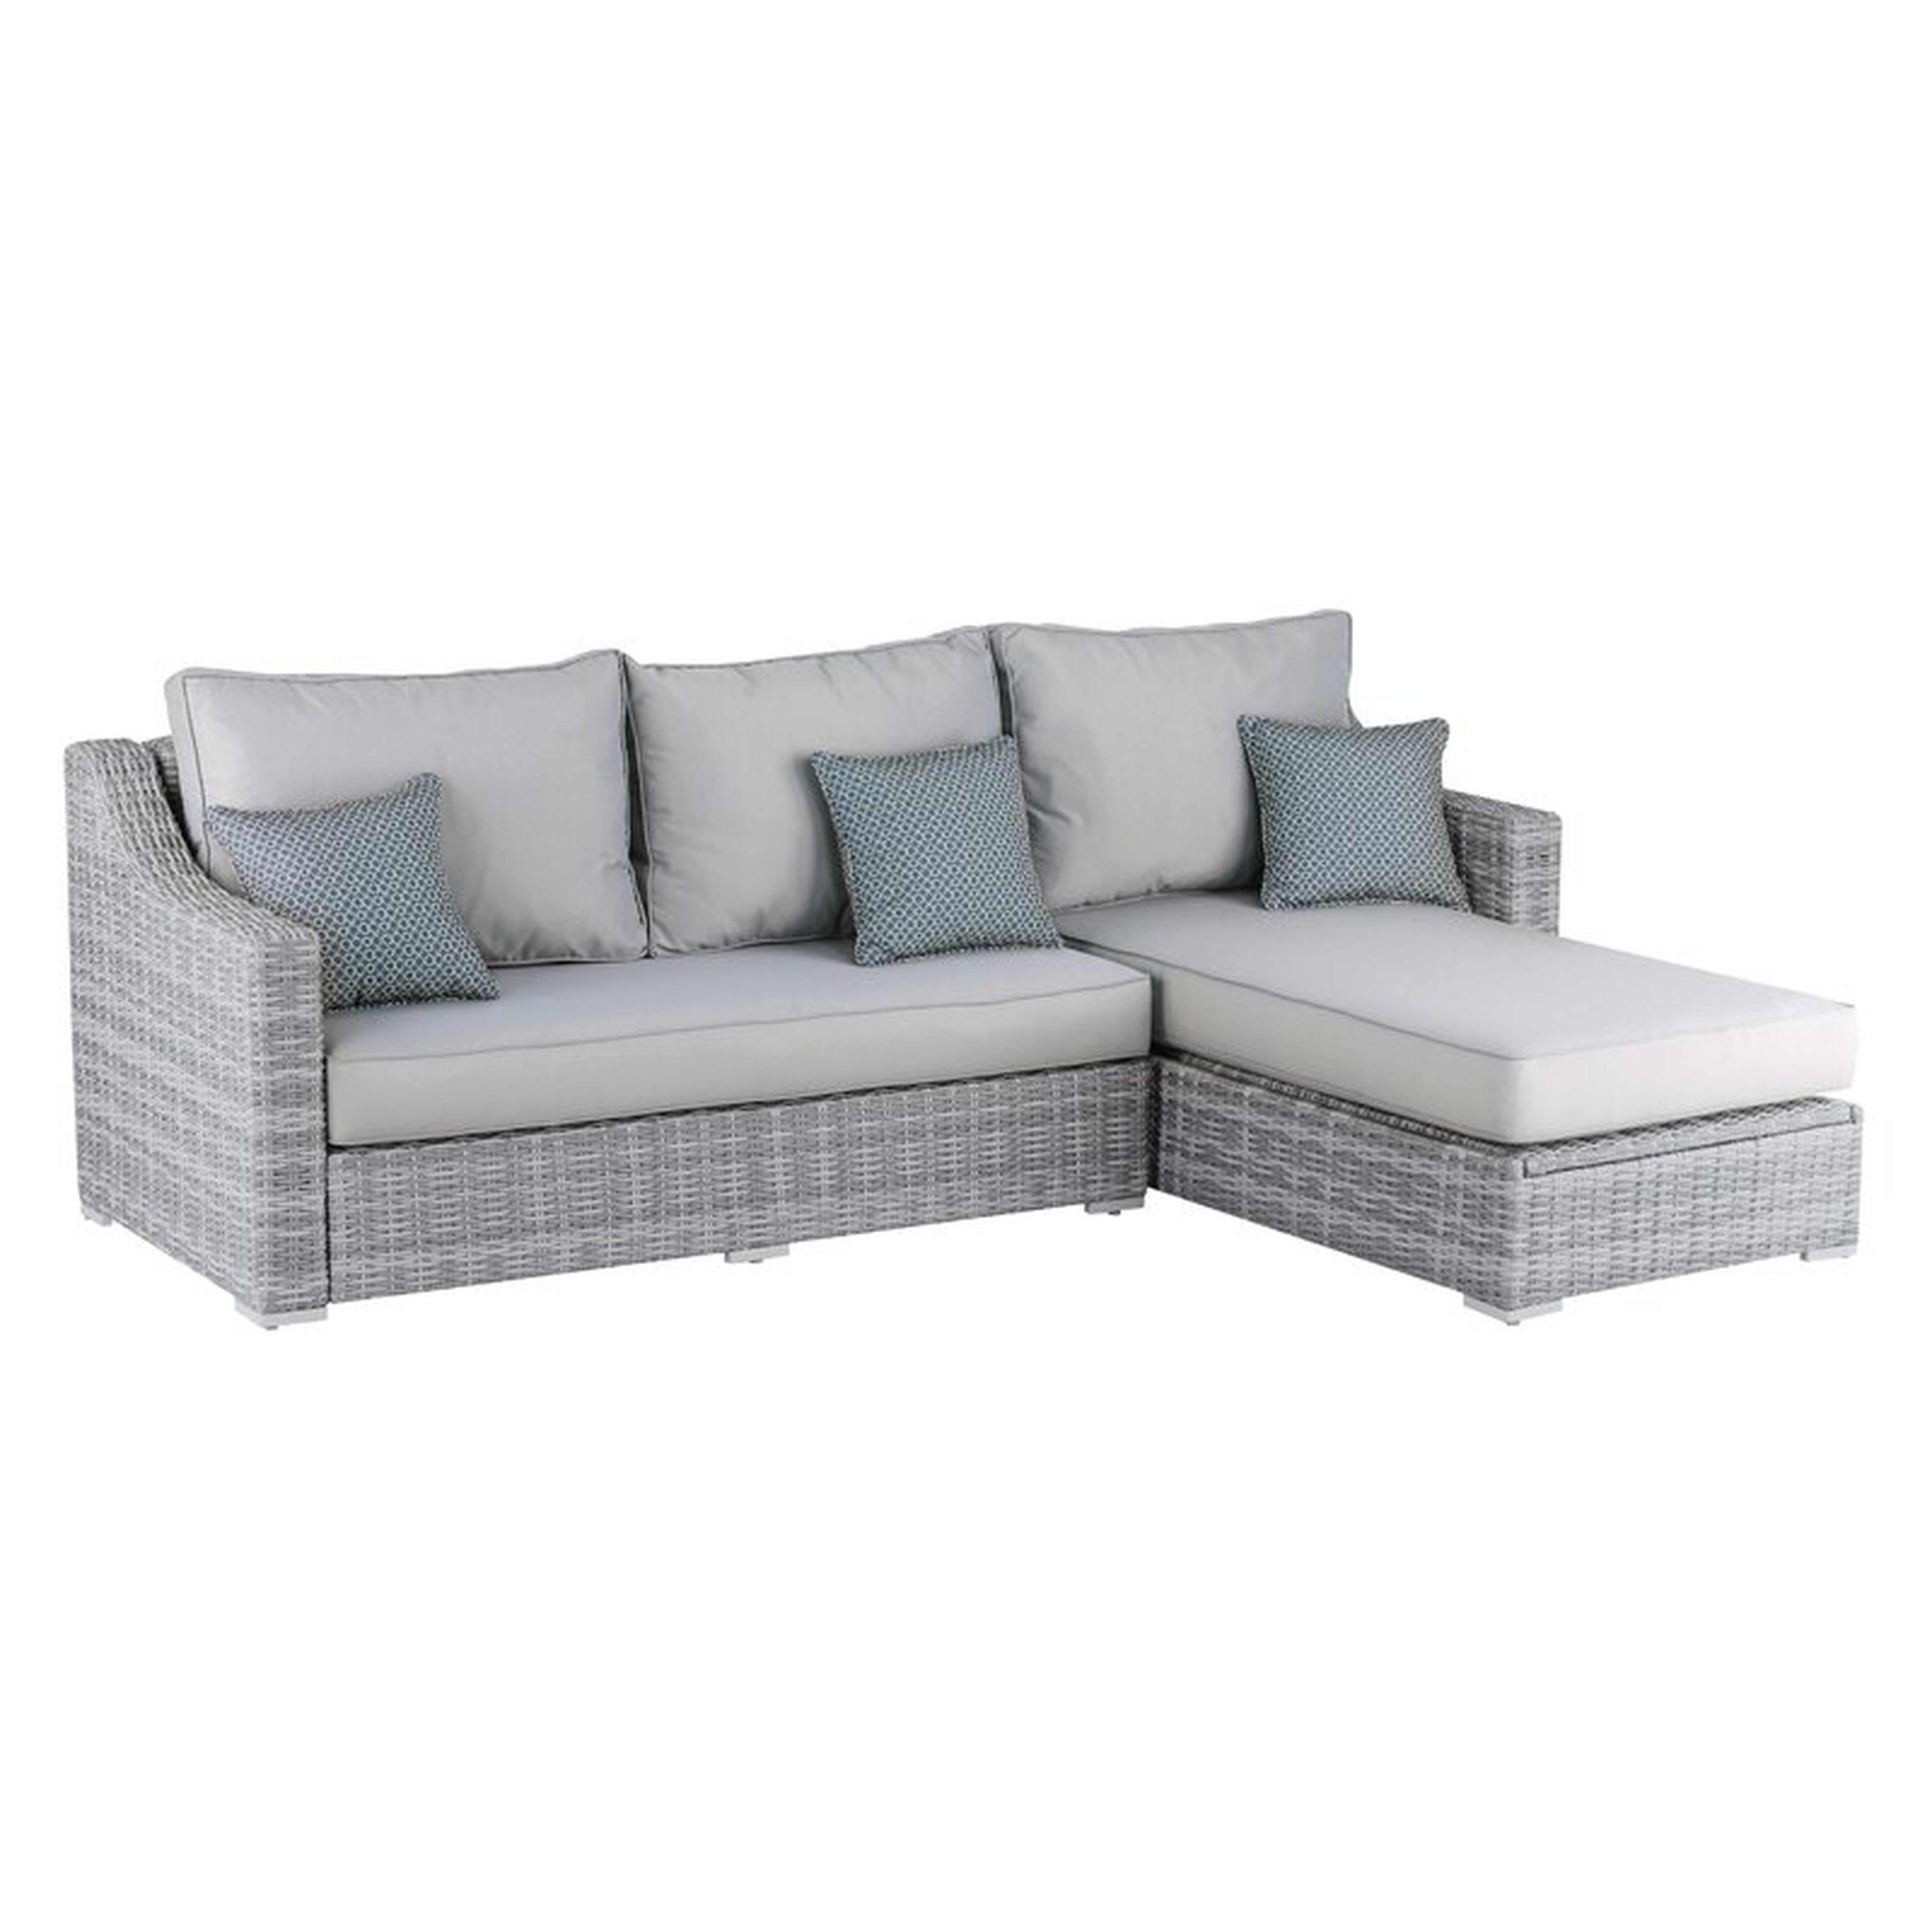 Vallauris Storage Sectional with Cushions - Wayfair